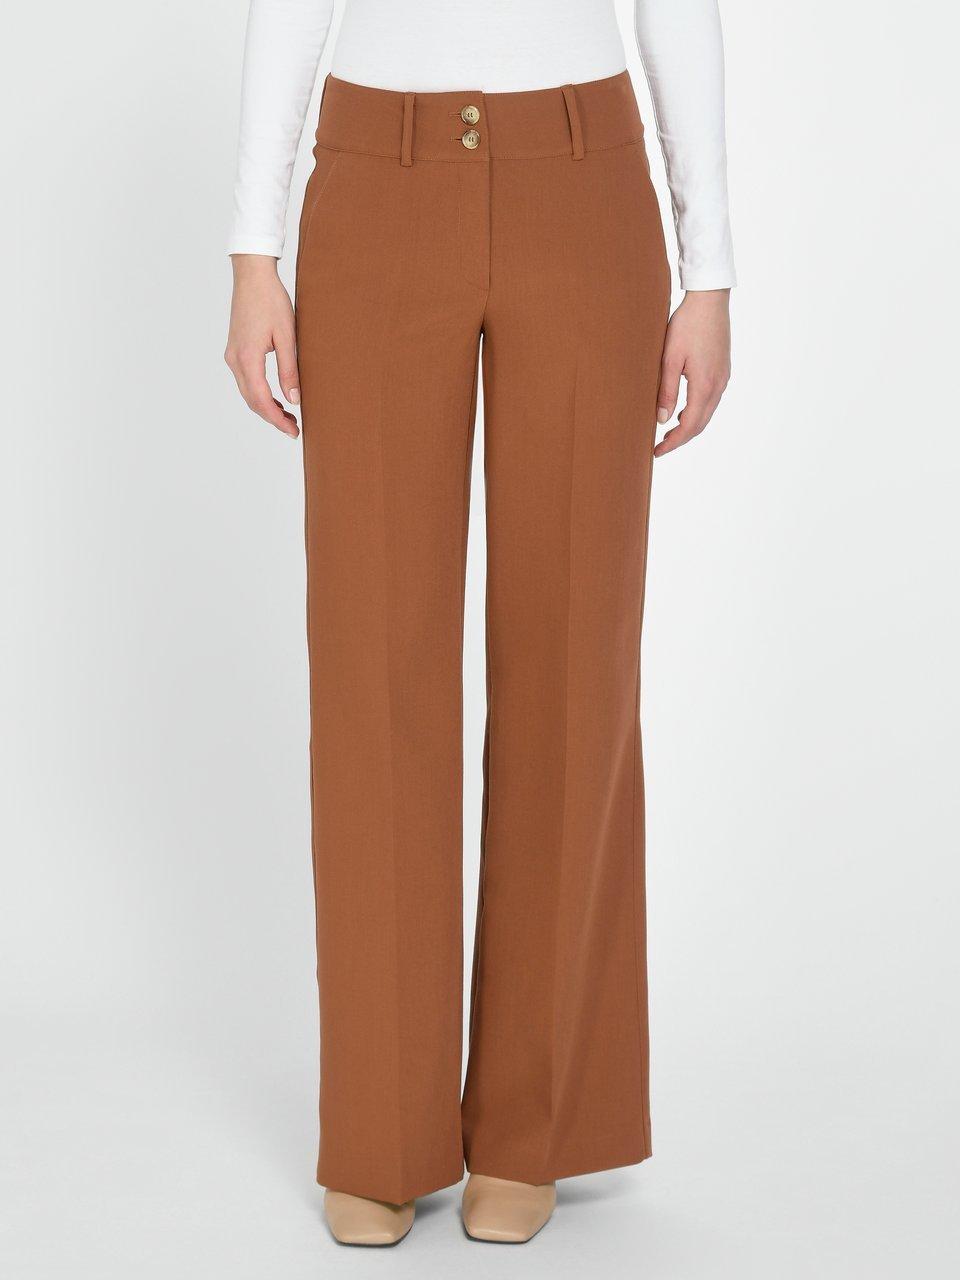 Fadenmeister Berlin - Le pantalon jambes larges